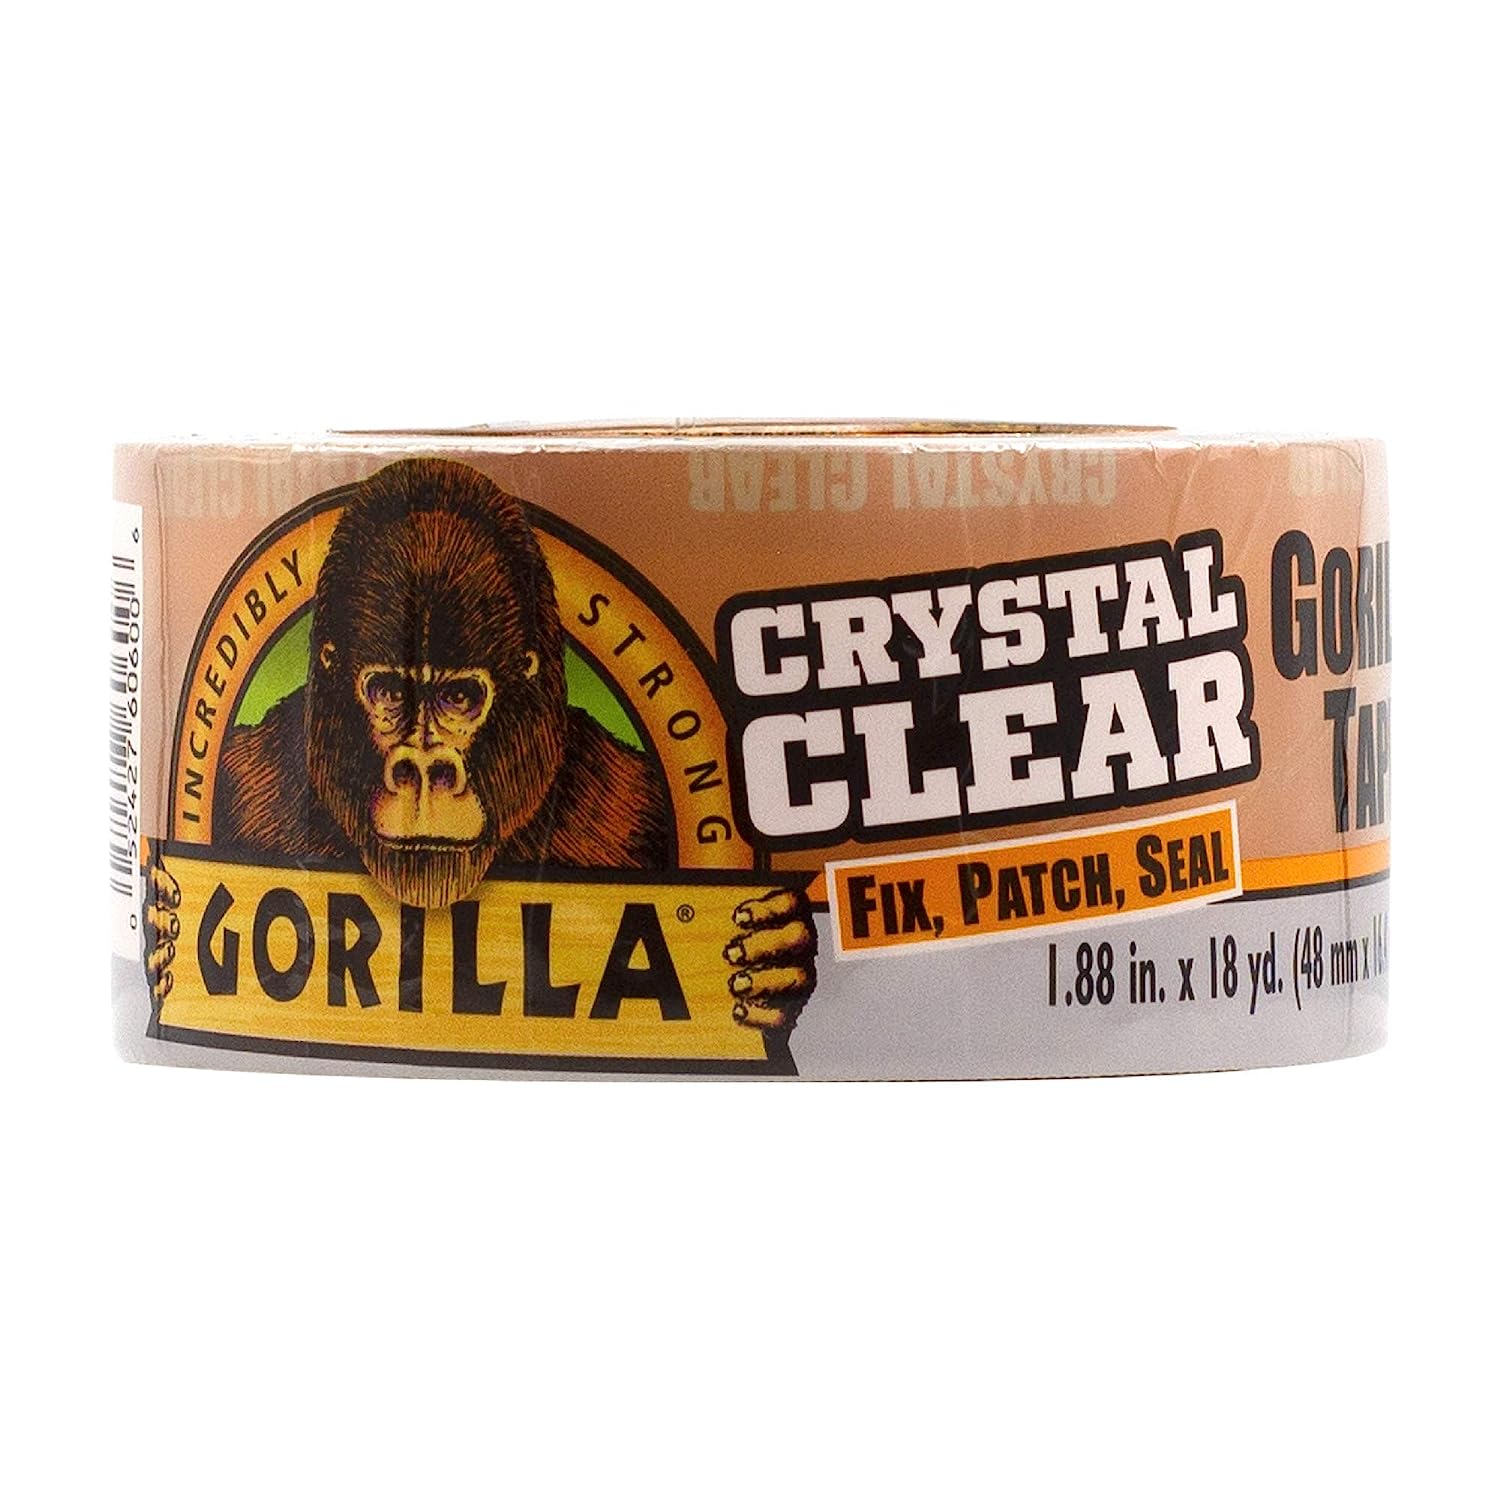 Gorilla Crystal Clear Repair Duct Tape, 1.88” x 18 yd, [...]